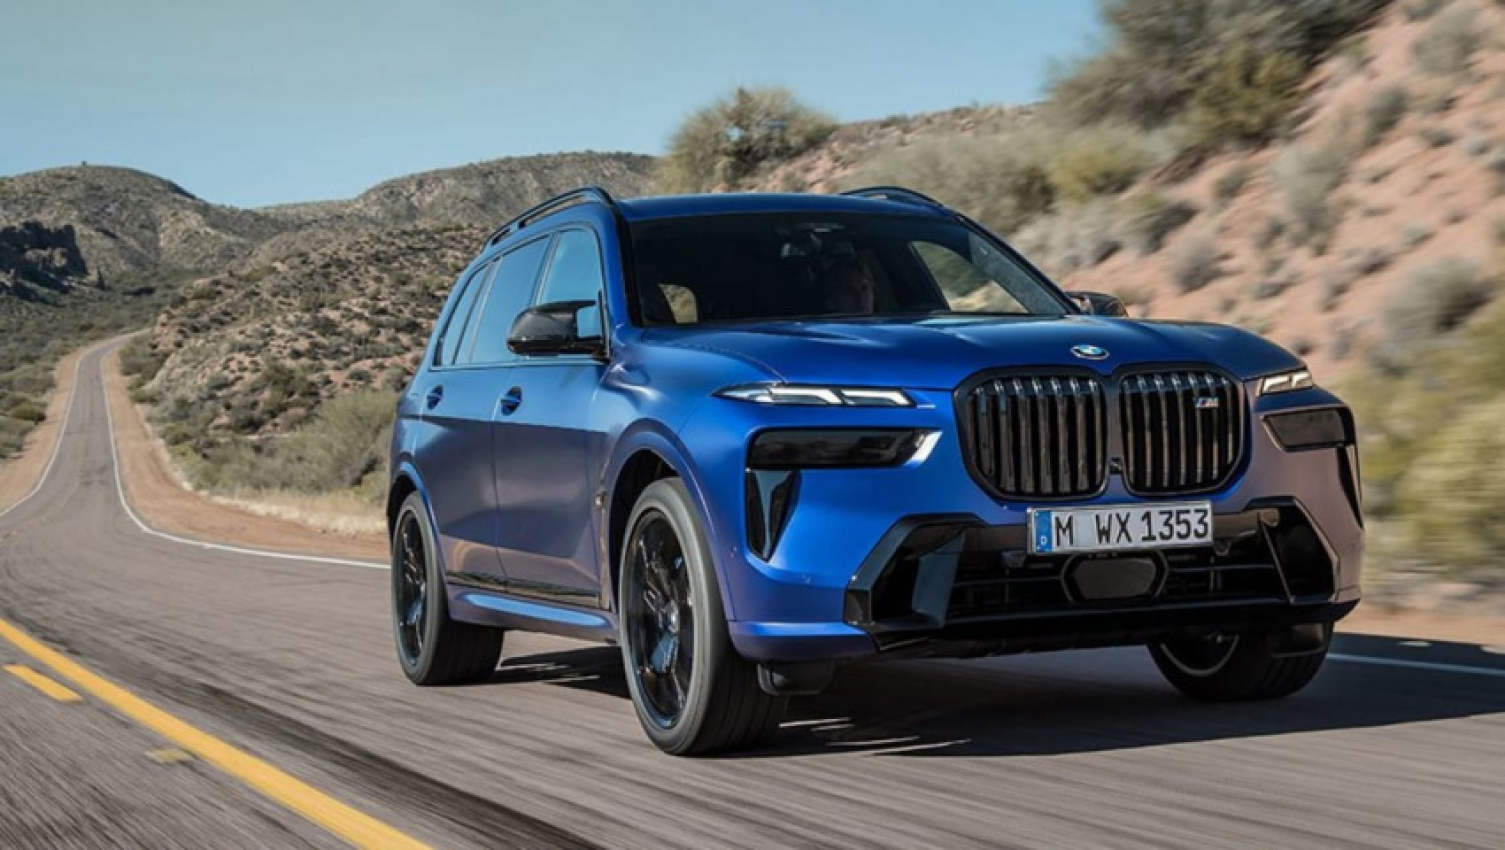 audi, autos, bmw, cars, mercedes-benz, audi q8, bmw news, bmw suv range, bmw x models, bmw x models 2022, bmw x7, bmw x7 2022, family cars, green cars, hybrid cars, mercedes, prestige & luxury cars, 2022 bmw x7 gets major update with new engines, tech, bold new look to take on audi q8 and mercedes-benz gls - arrives in australia later this year